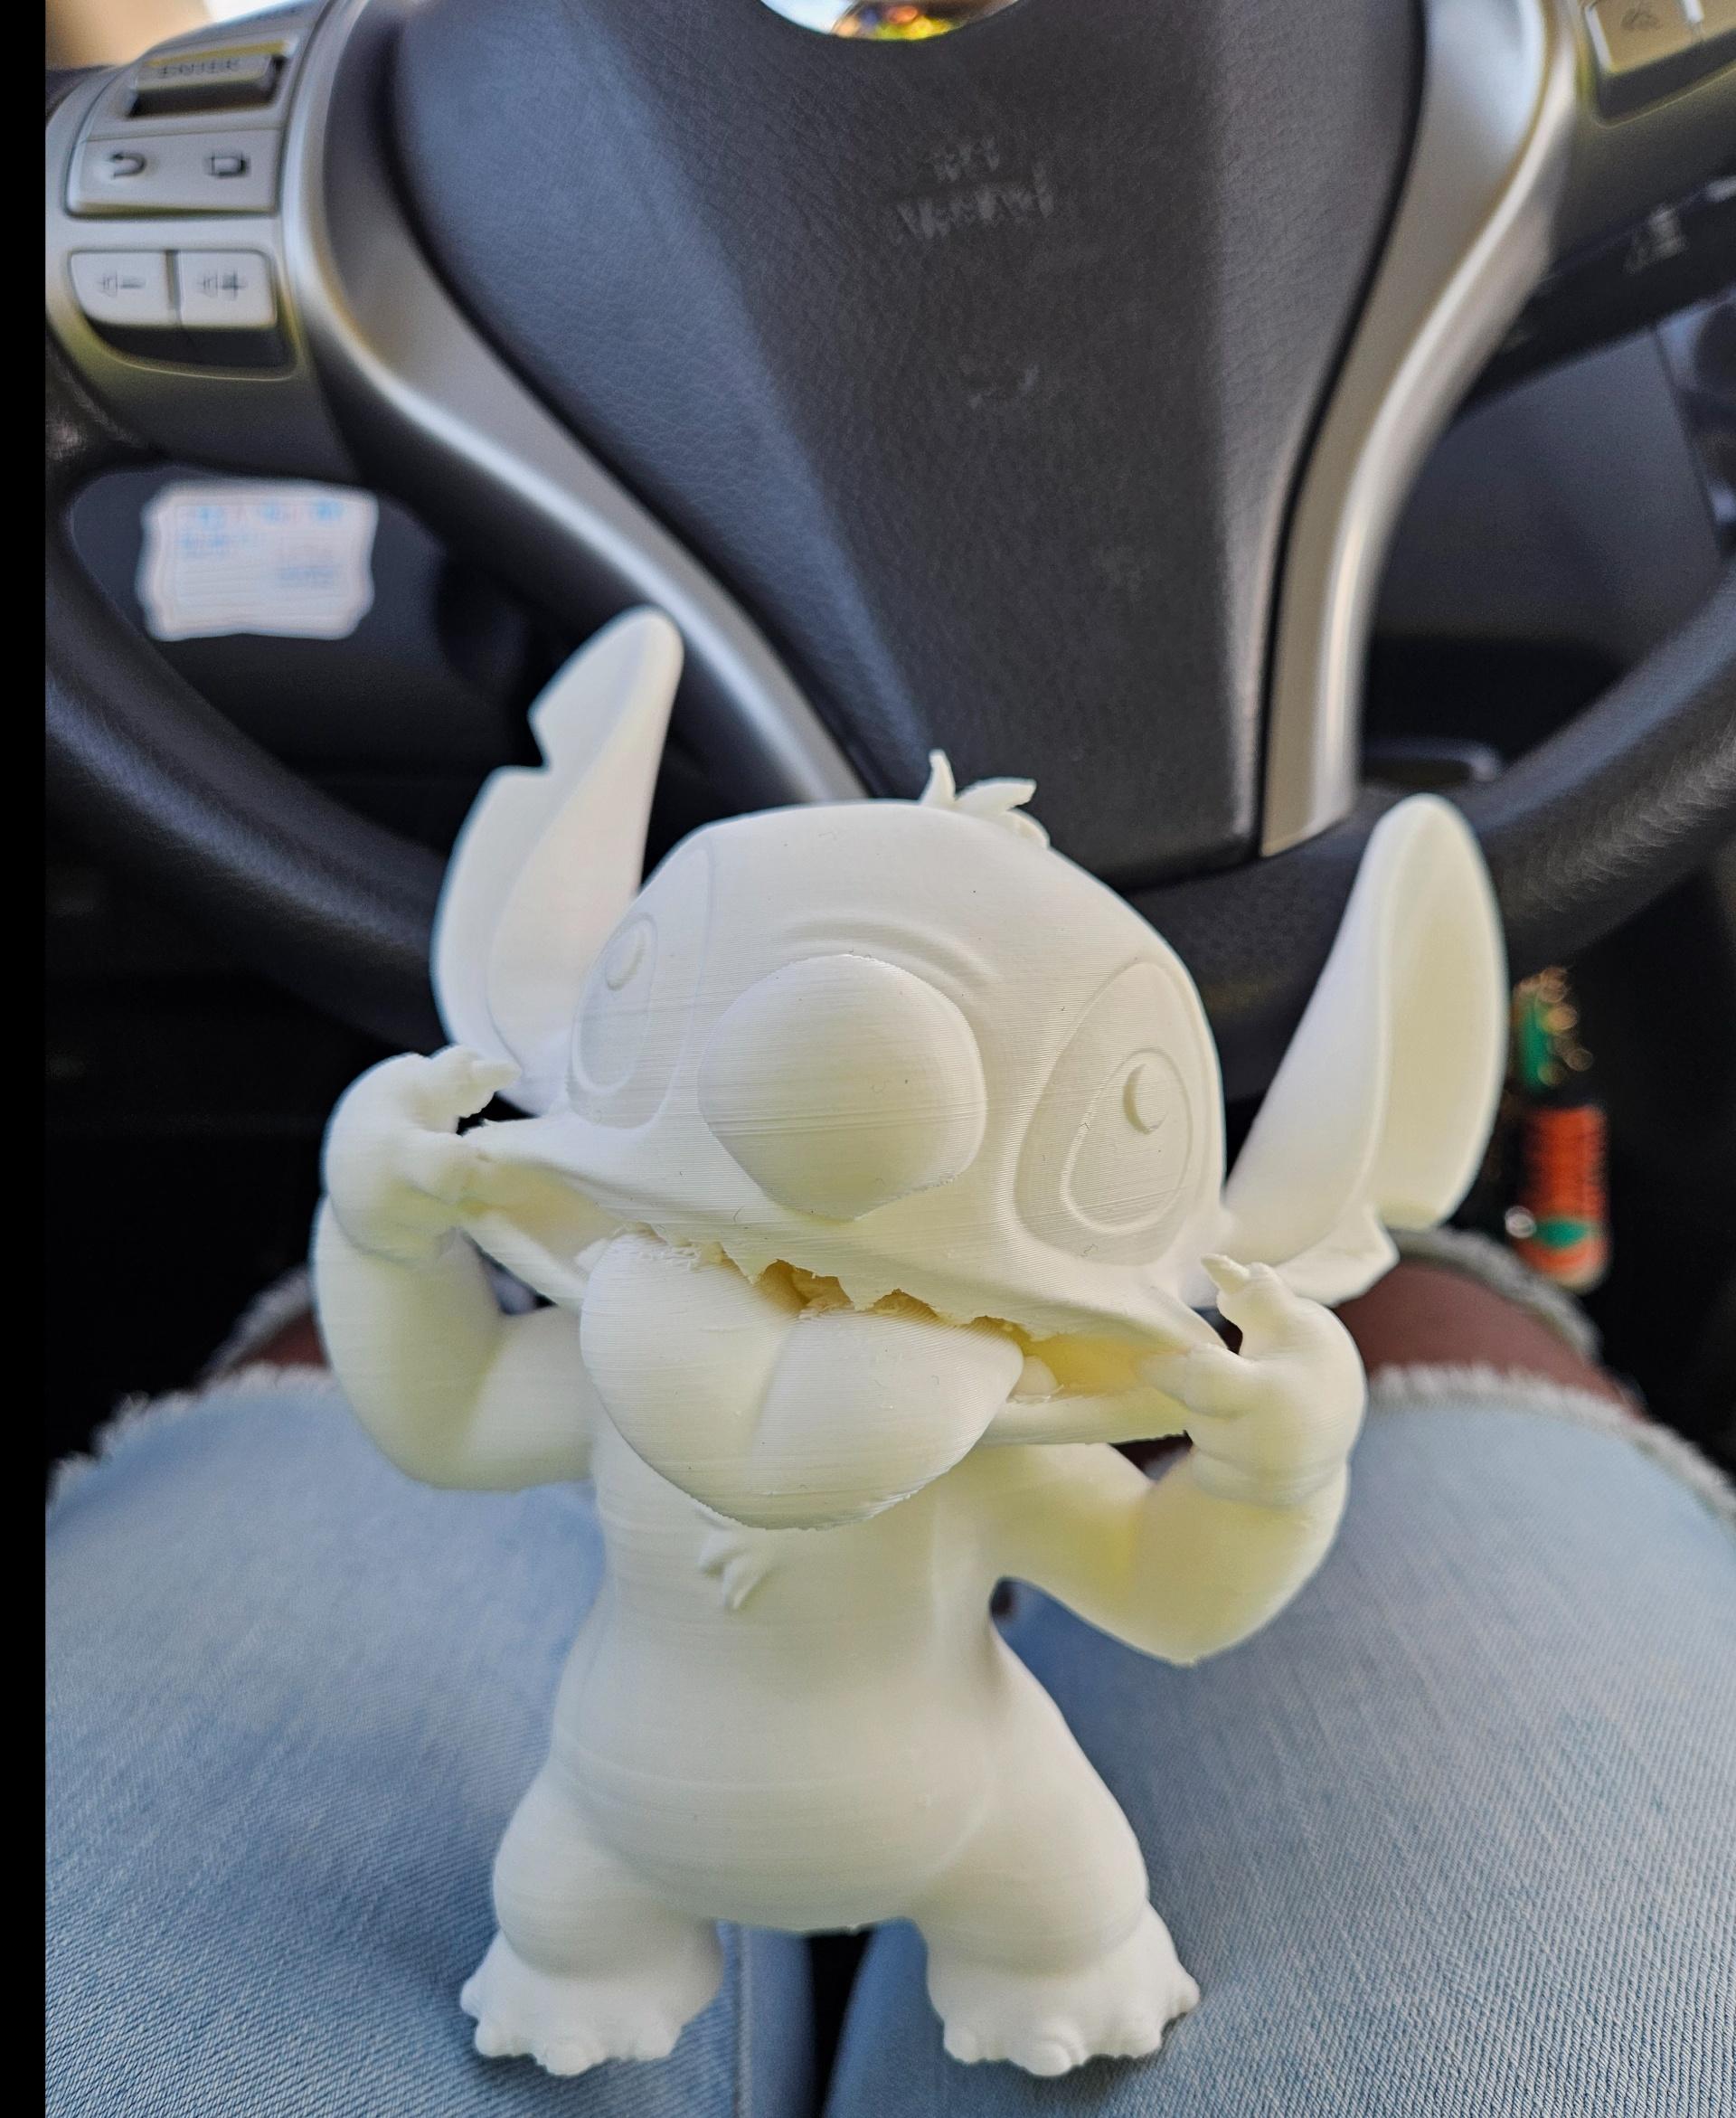 Stitch - Had this guy printed at my local library in Kinston, N.C. using their 3D printer. I love it, can't wait to paint him.  - 3d model